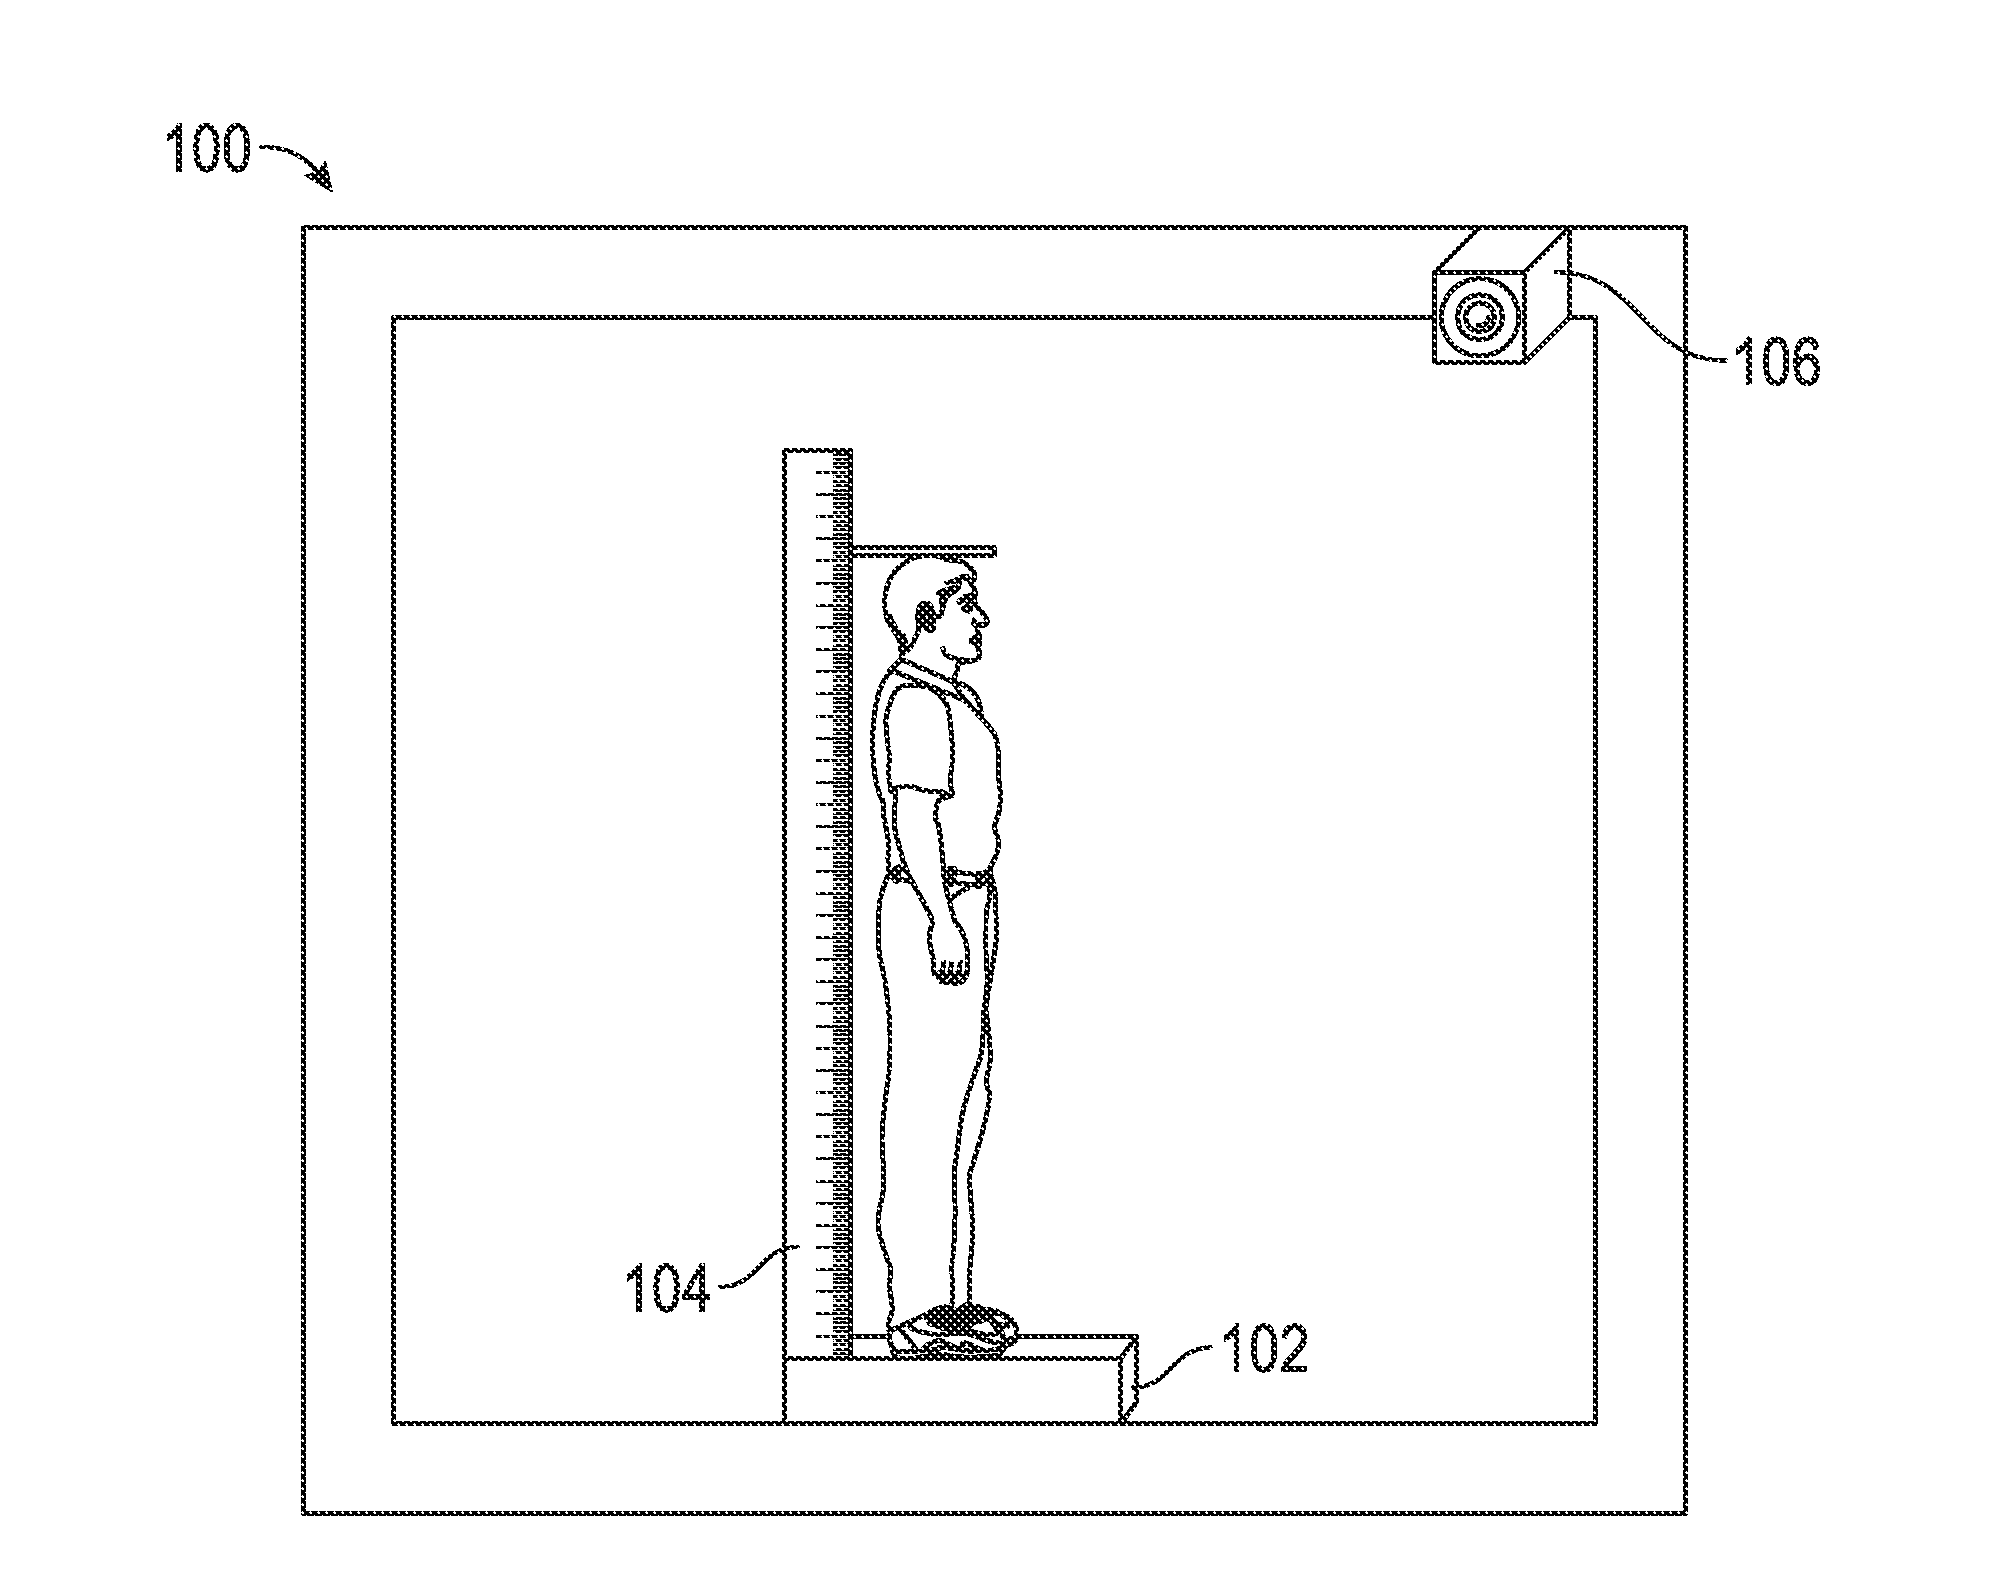 System and method for measuring segment parameters of a human body for recording a body mass index